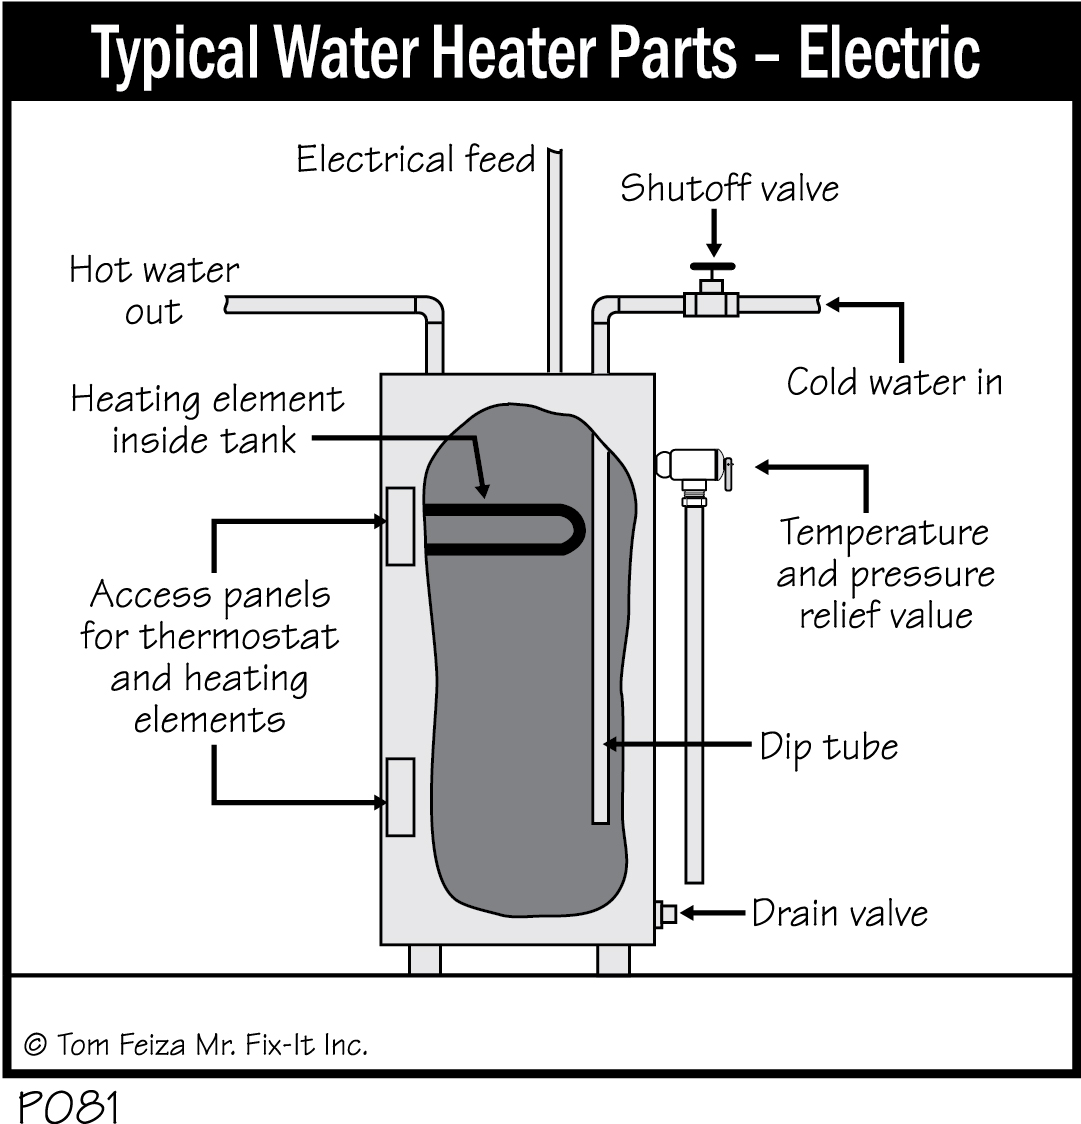 P081 - Typical Water Heater Parts - Electric